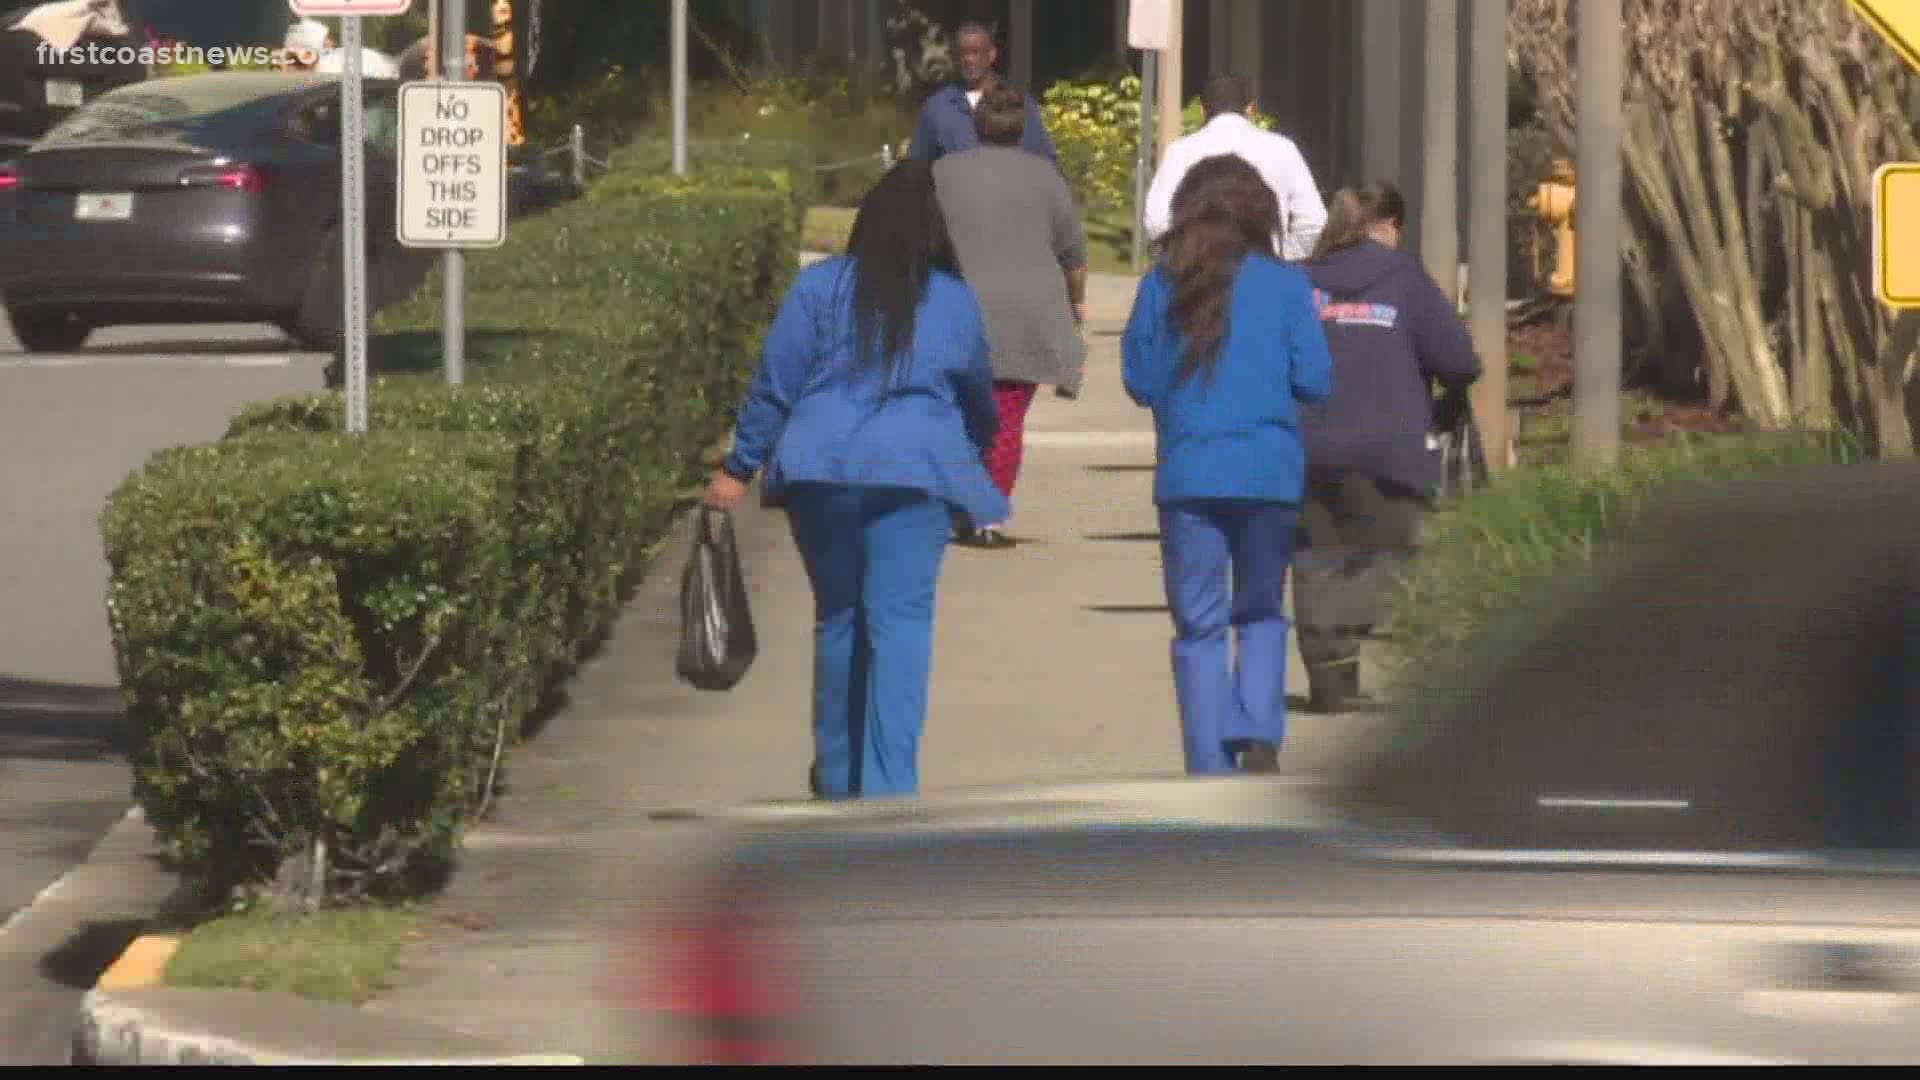 UF Health Jacksonville is changing its visitor policy due to the increase of COVID-19 infections in the city and state.